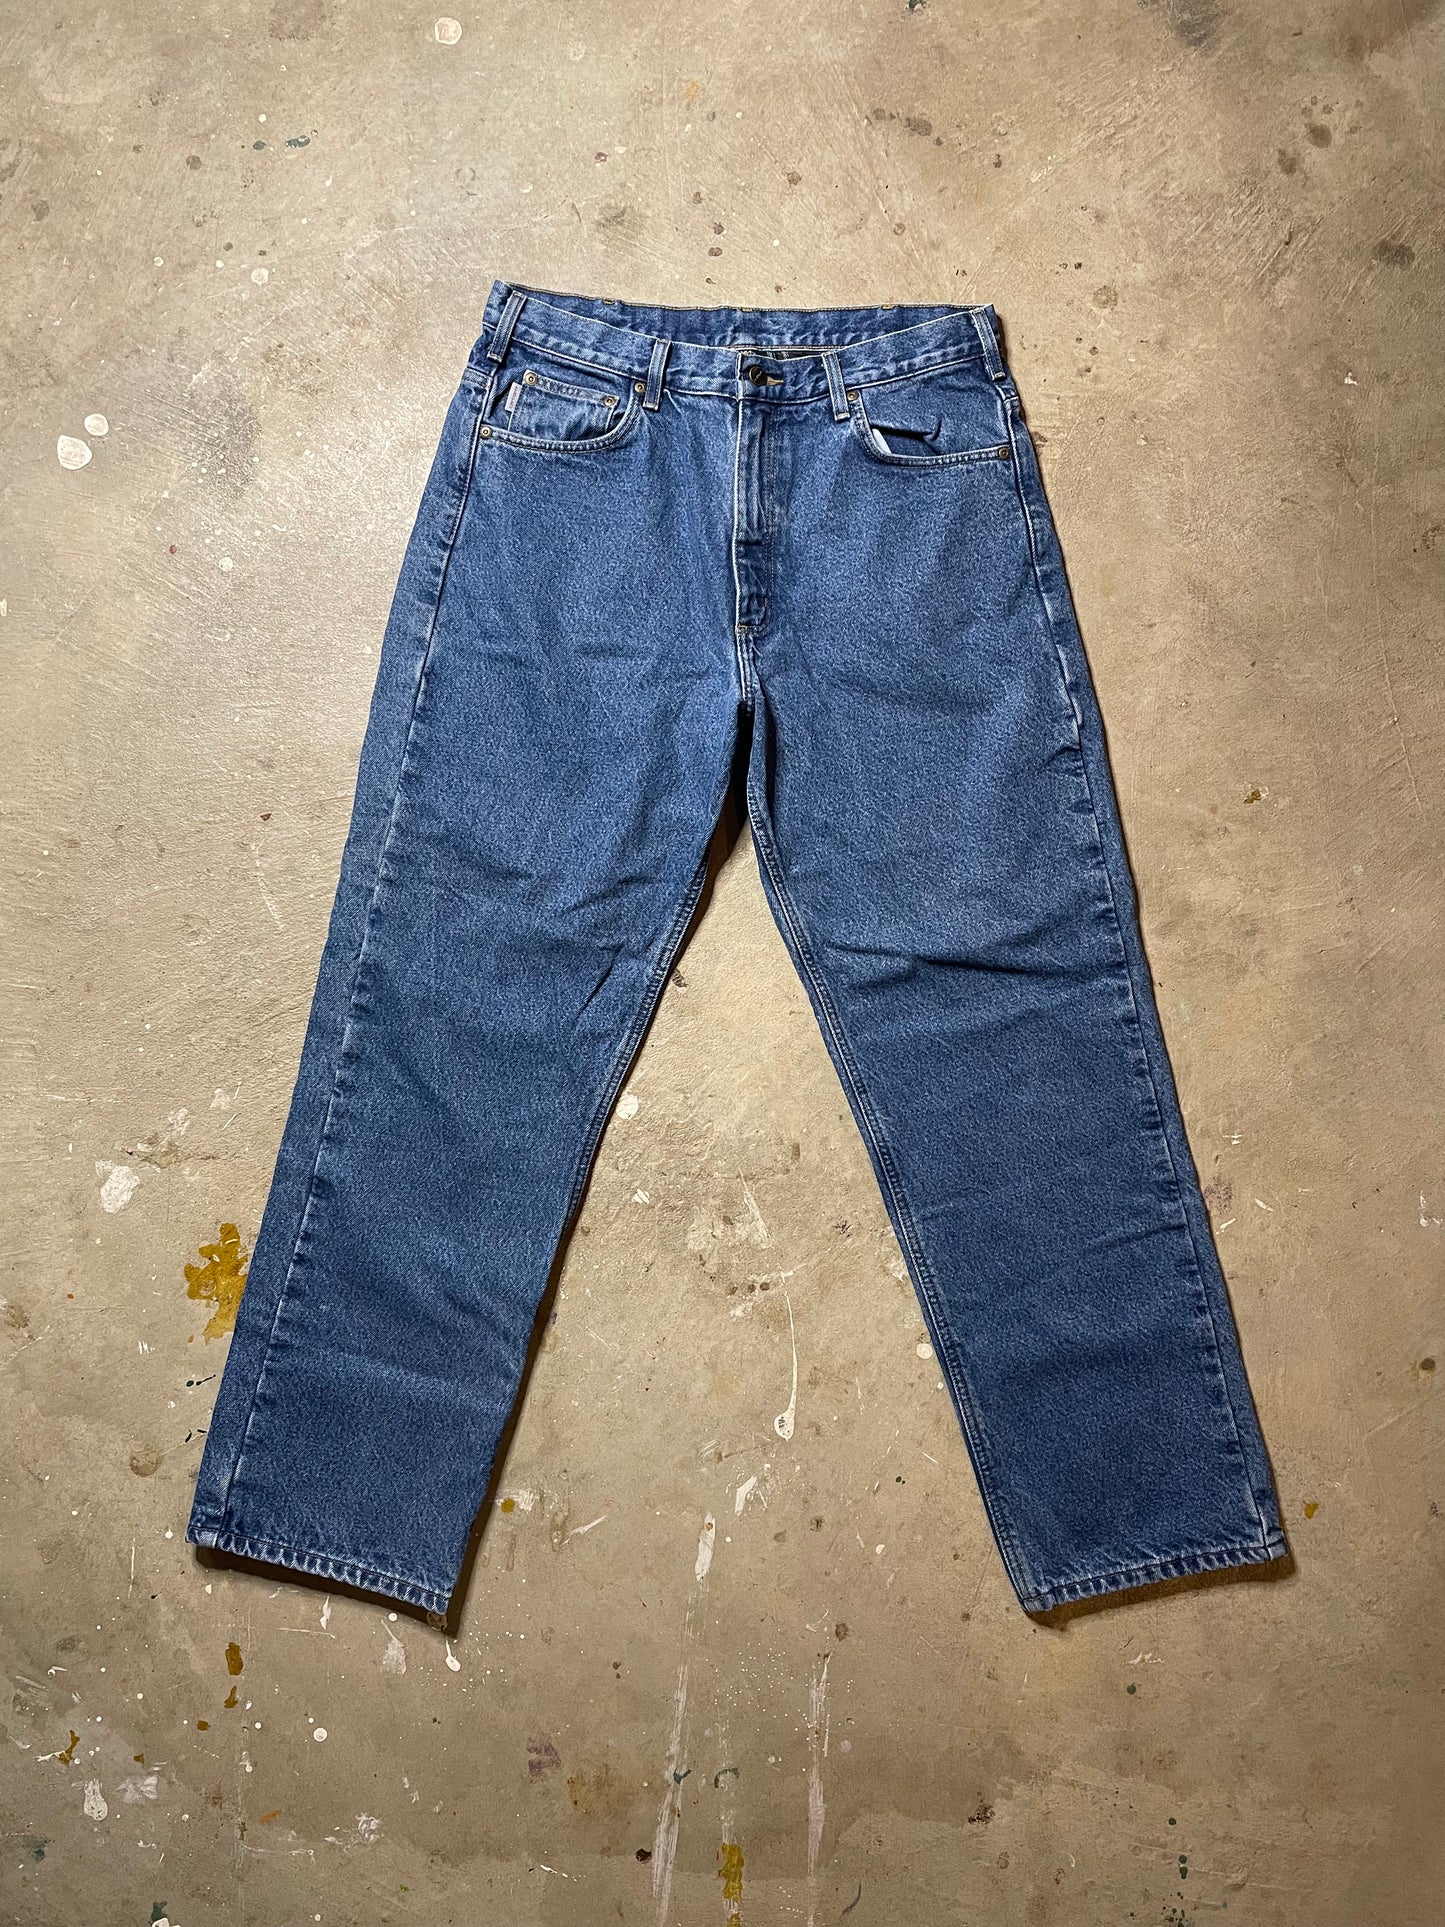 Carhartt Flannel Lined Jeans